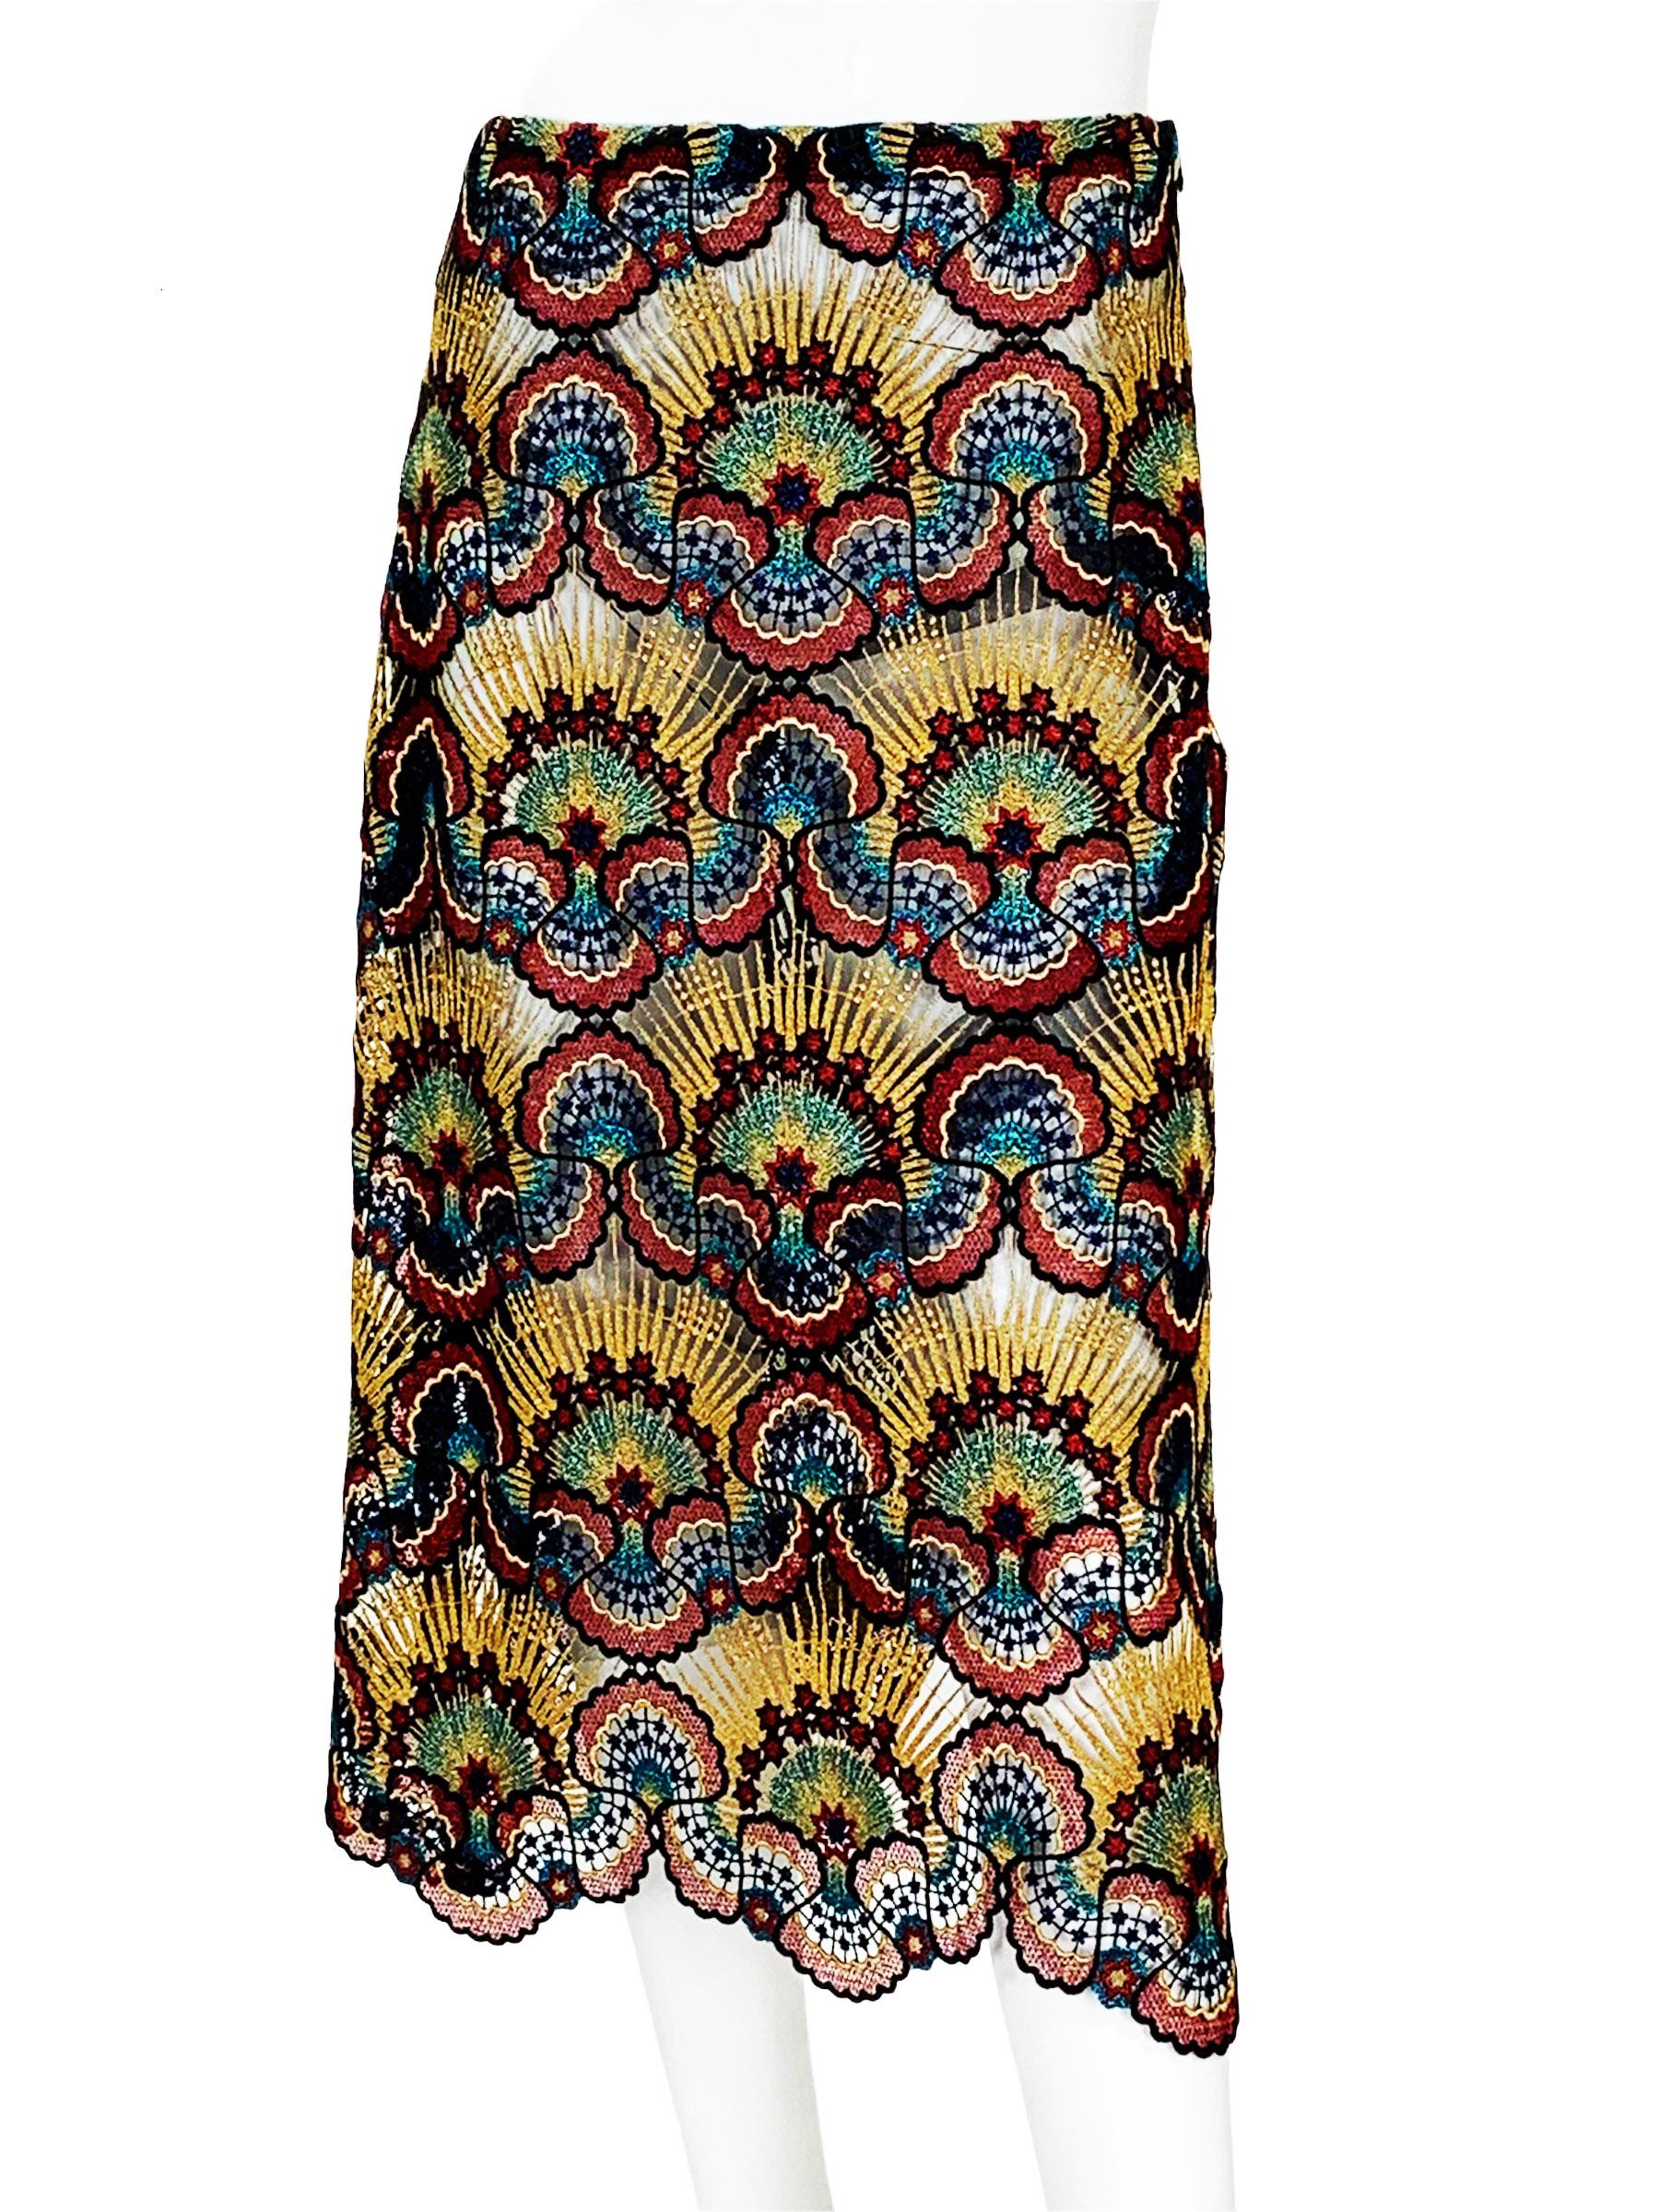 New Valentino Metallic Sheer Lace Skirt
Pre-Fall 2016 Collection
Italian size - 42
Metallic Multicolor Palette - Gold, Burgundy, Navy, Blue.
A-Line Style, Sheer Lace, Black Thin Tulle Lining, Side Zip Closure.
Measurements: Waist - 30 inches, Length